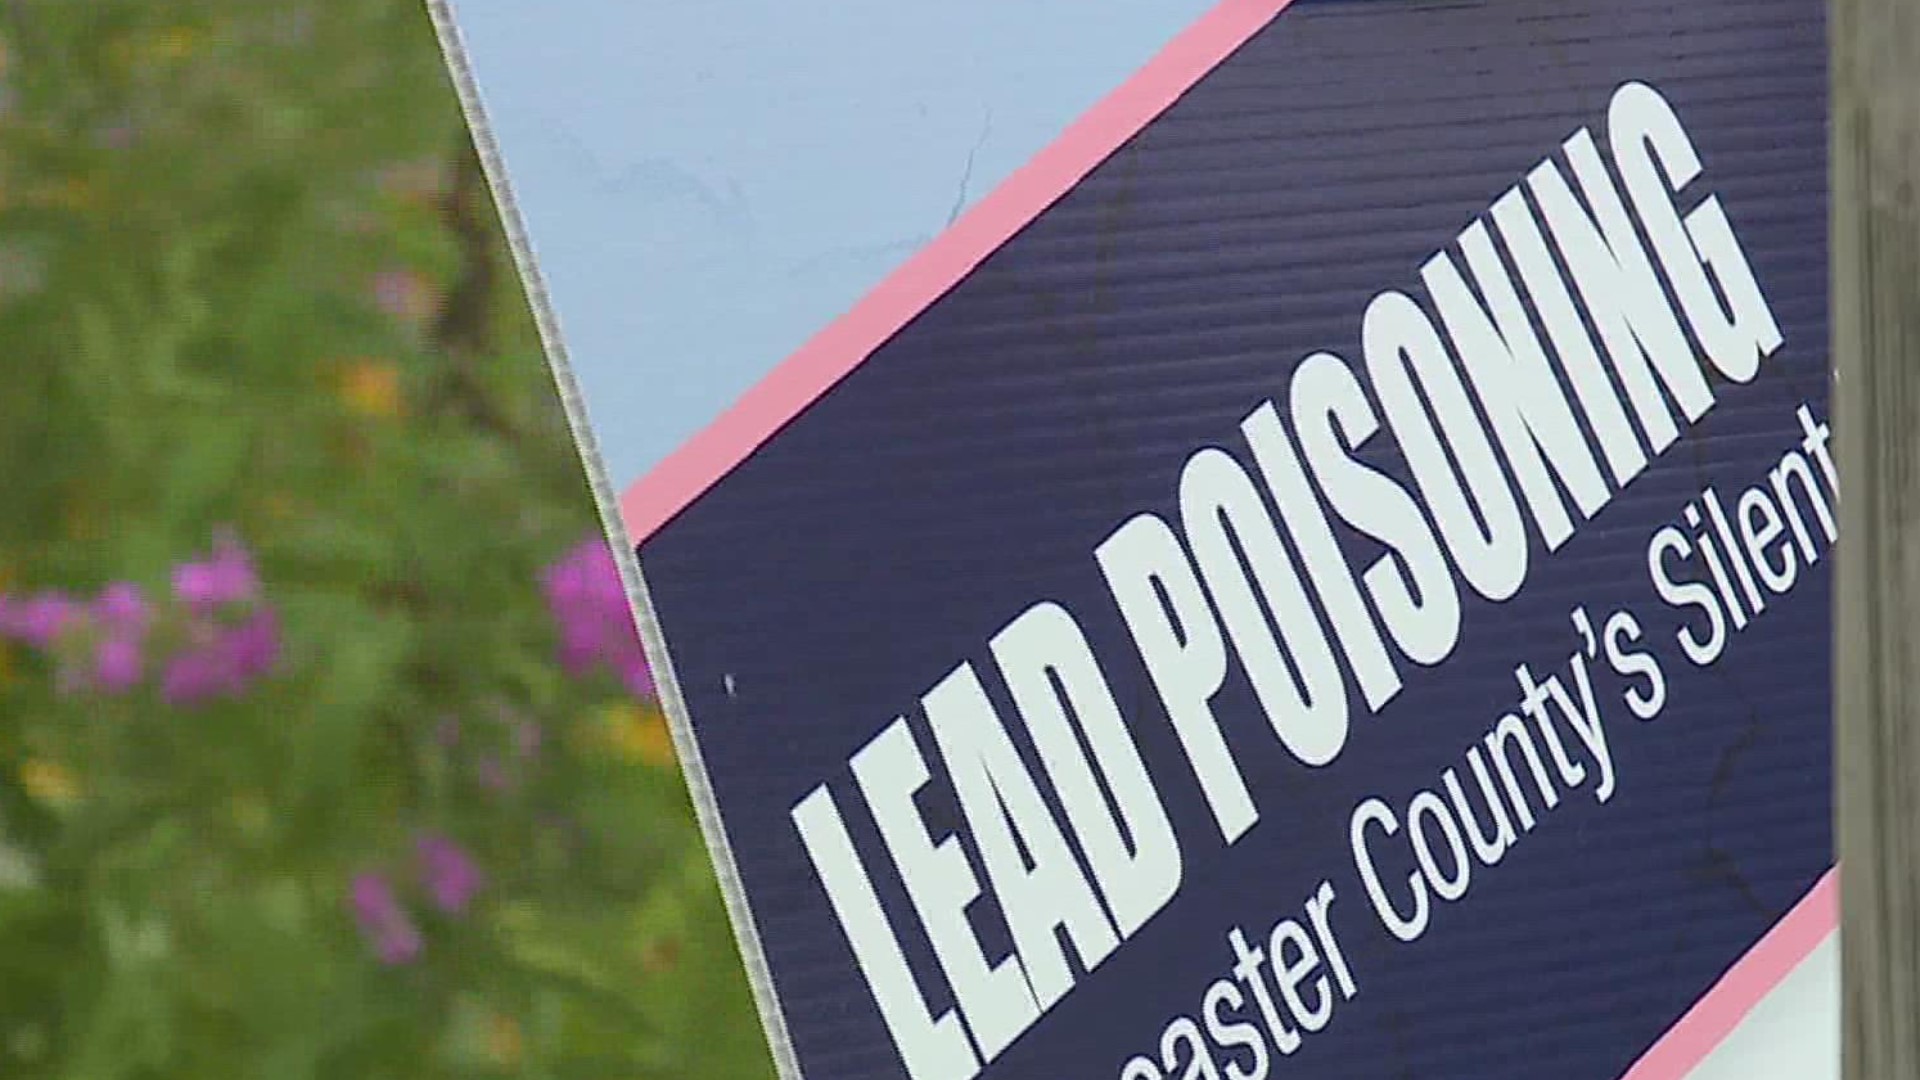 Lancaster General Health announced the $50 million "lead-free families" initiative.